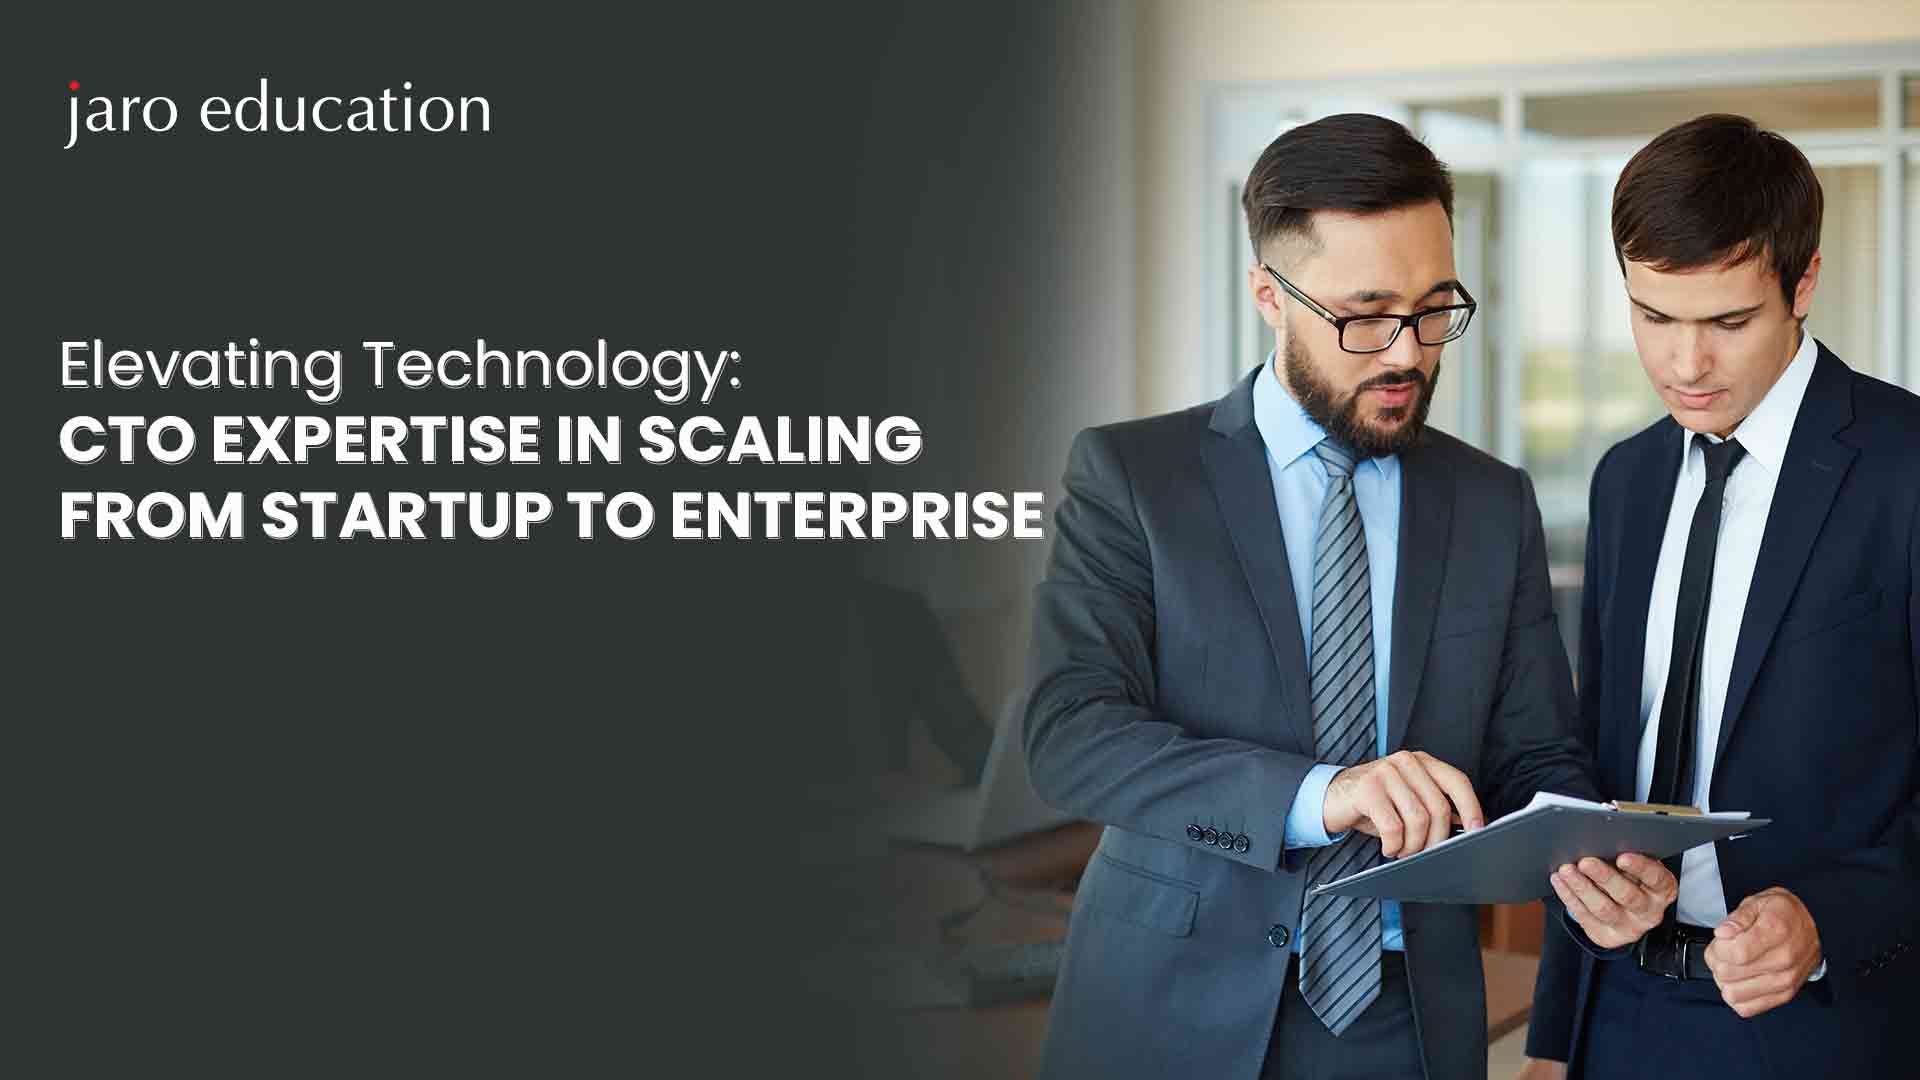 Elevating Technology CTO Expertise in Scaling from Startup to Enterprise